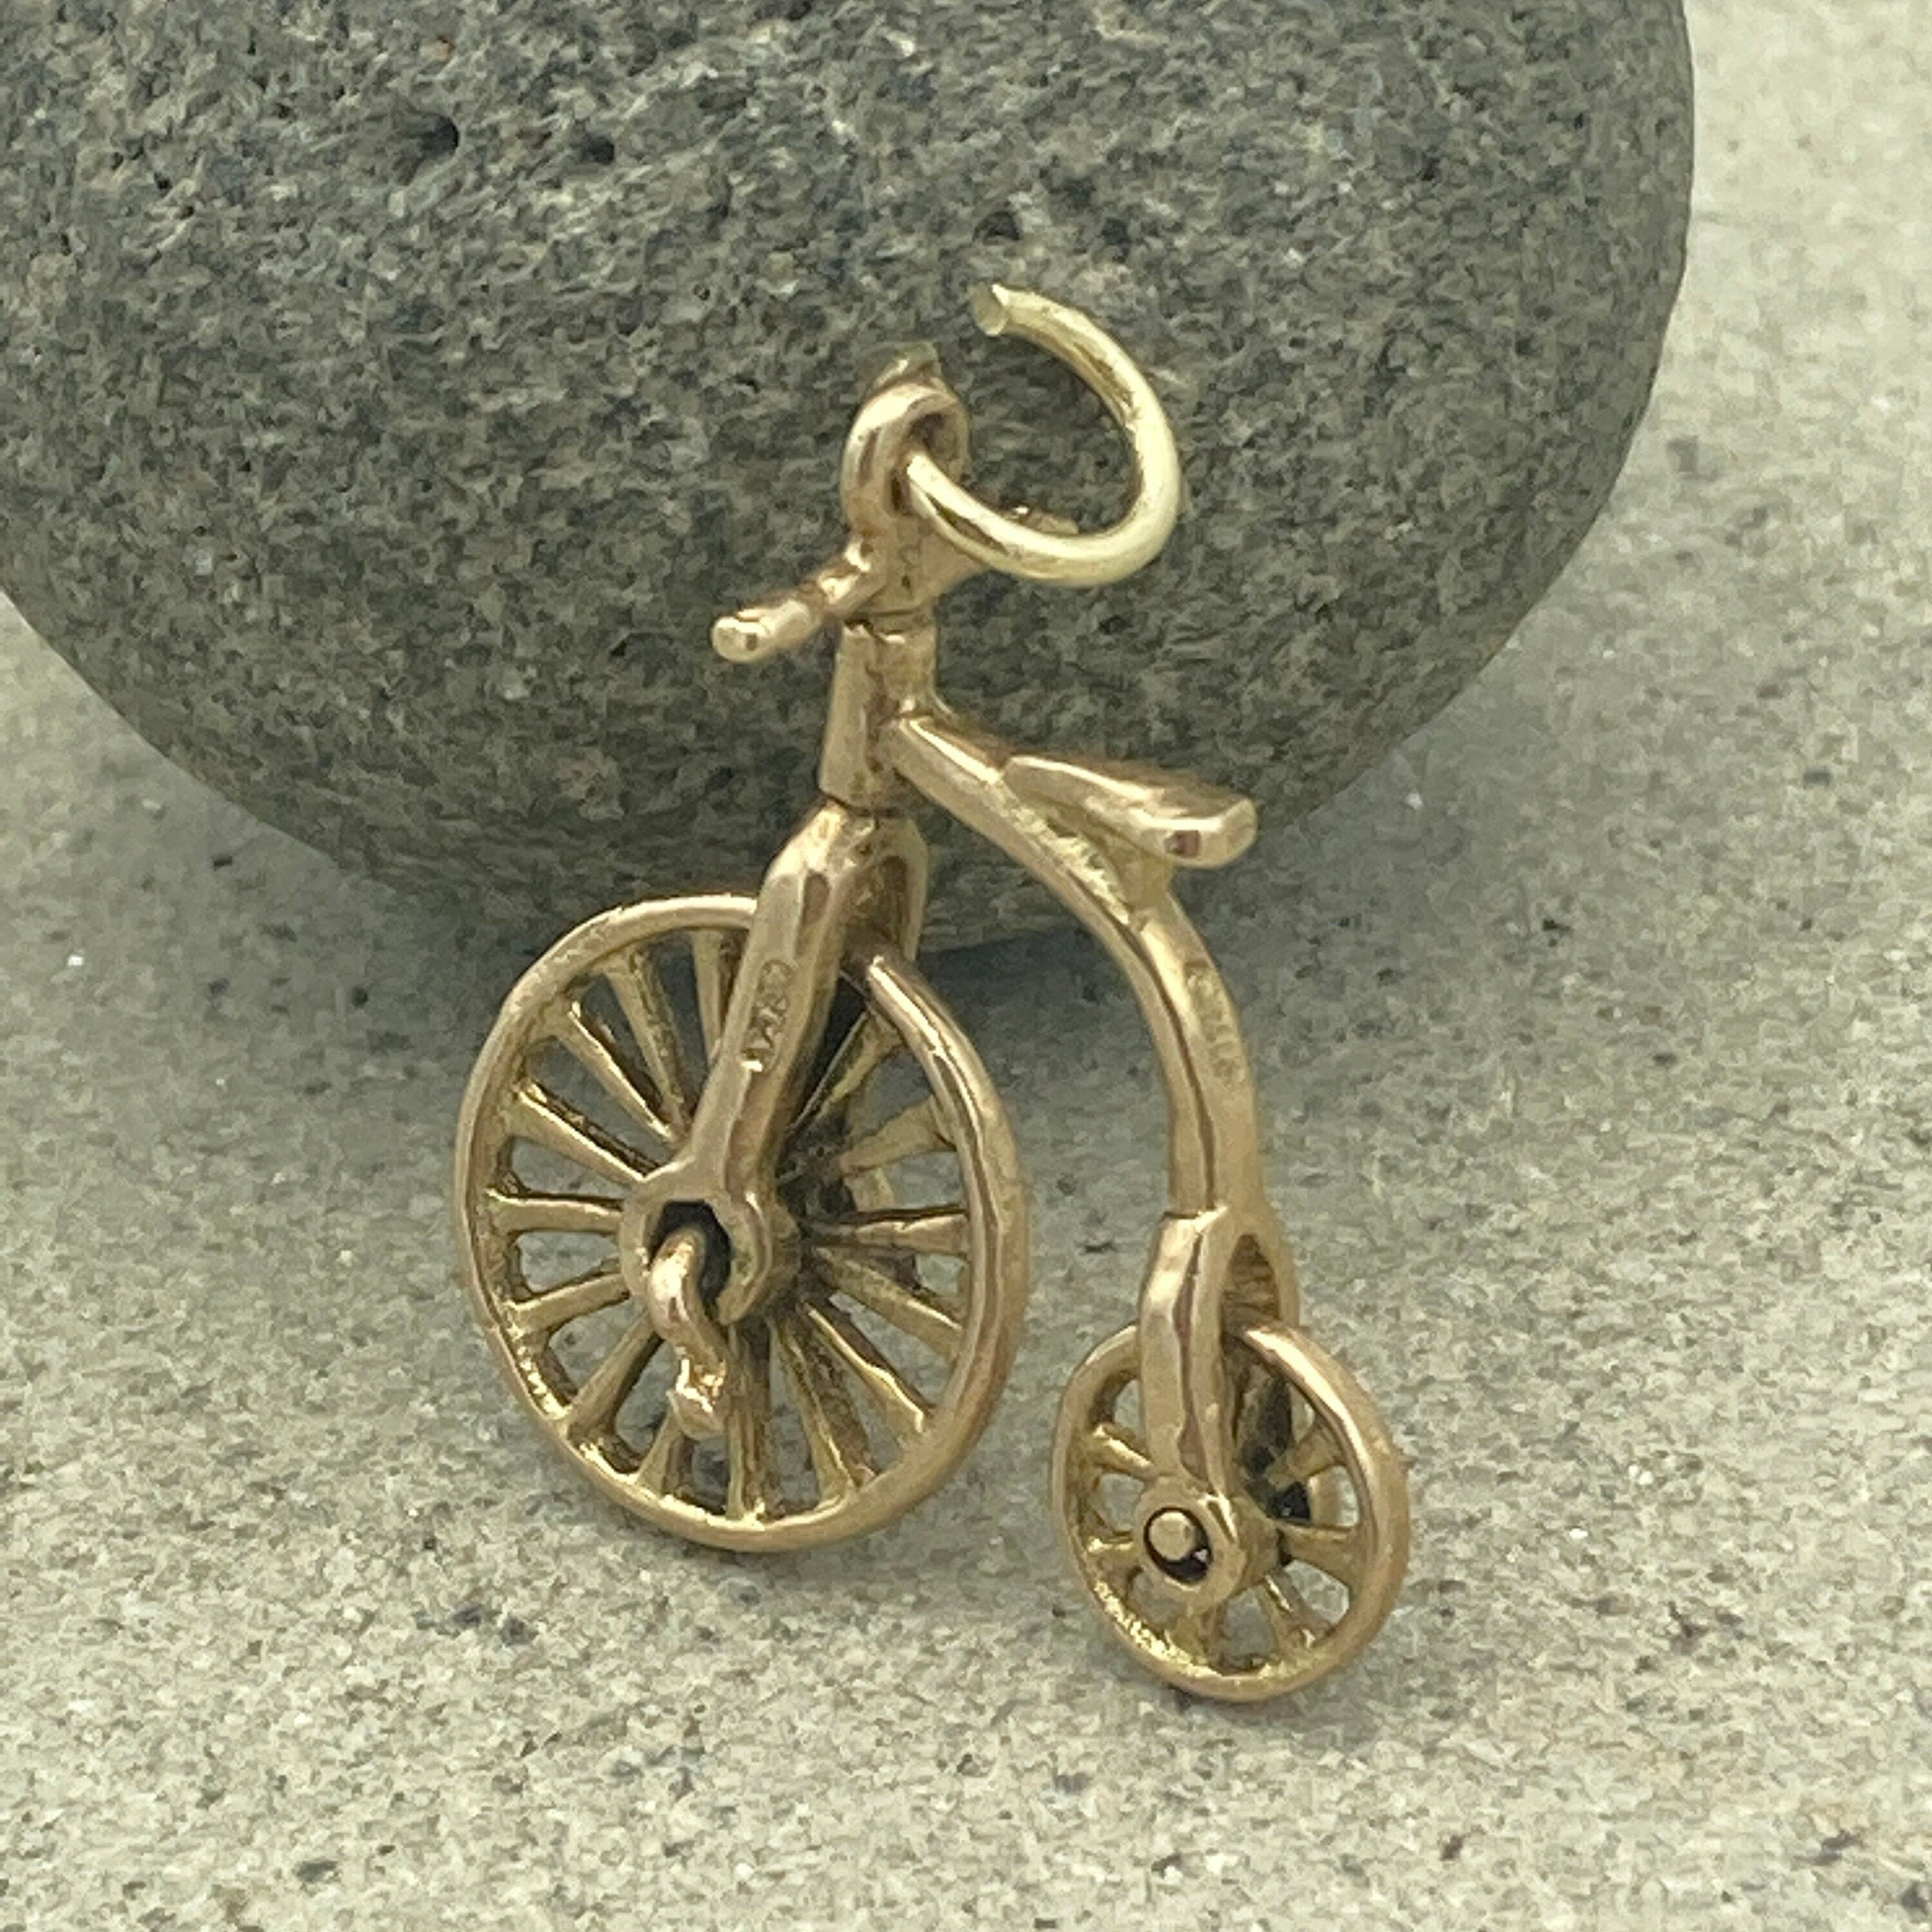 Vintage solid 9ct gold penny farthing bicycle charm / pendant hallmarked london 1963 9k gold 3d charm